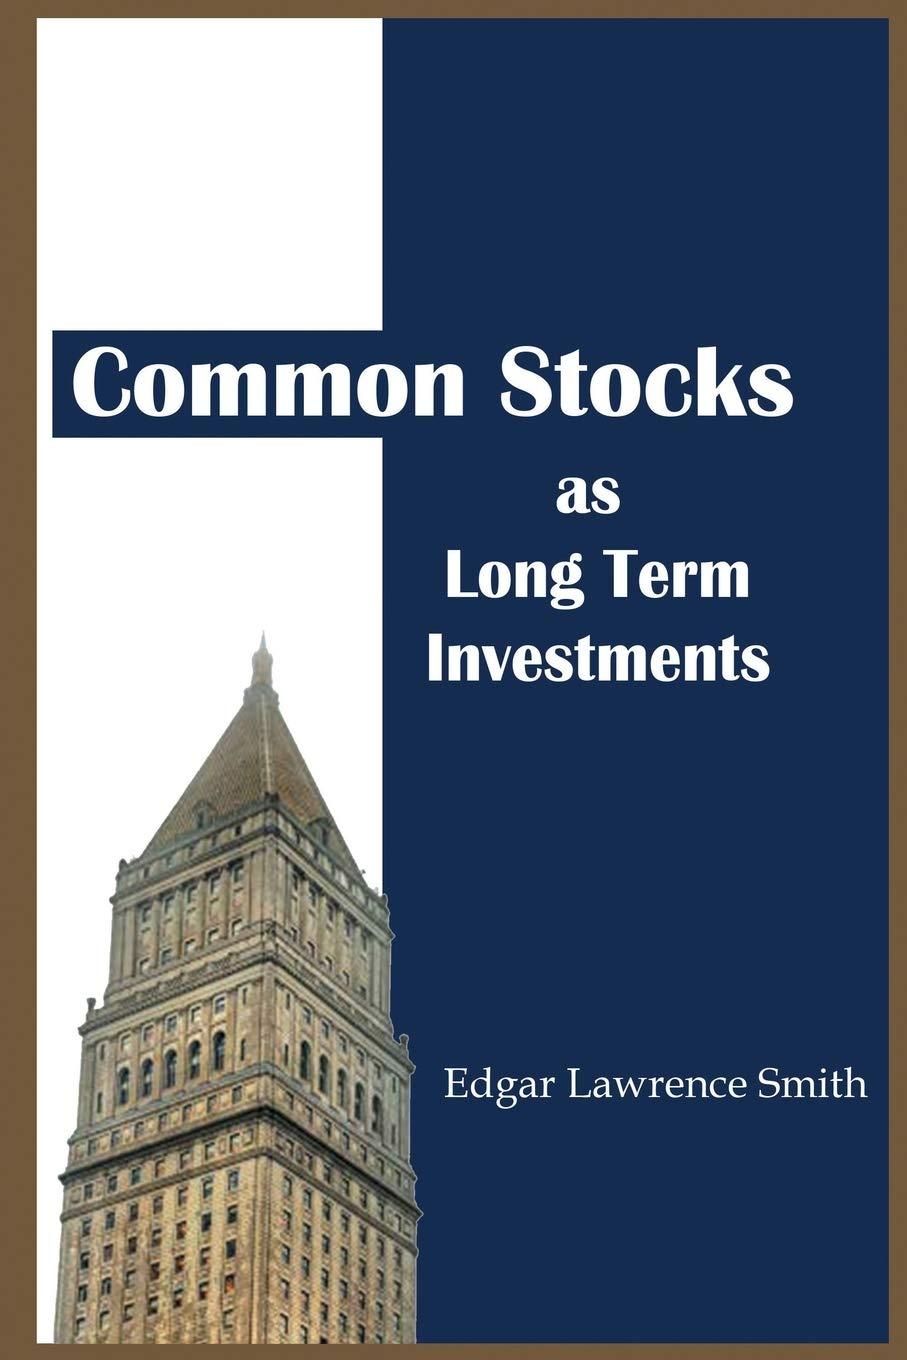 common stocks as long term investments 1st edition edgar lawrence smith, warren buffett 3072893551,